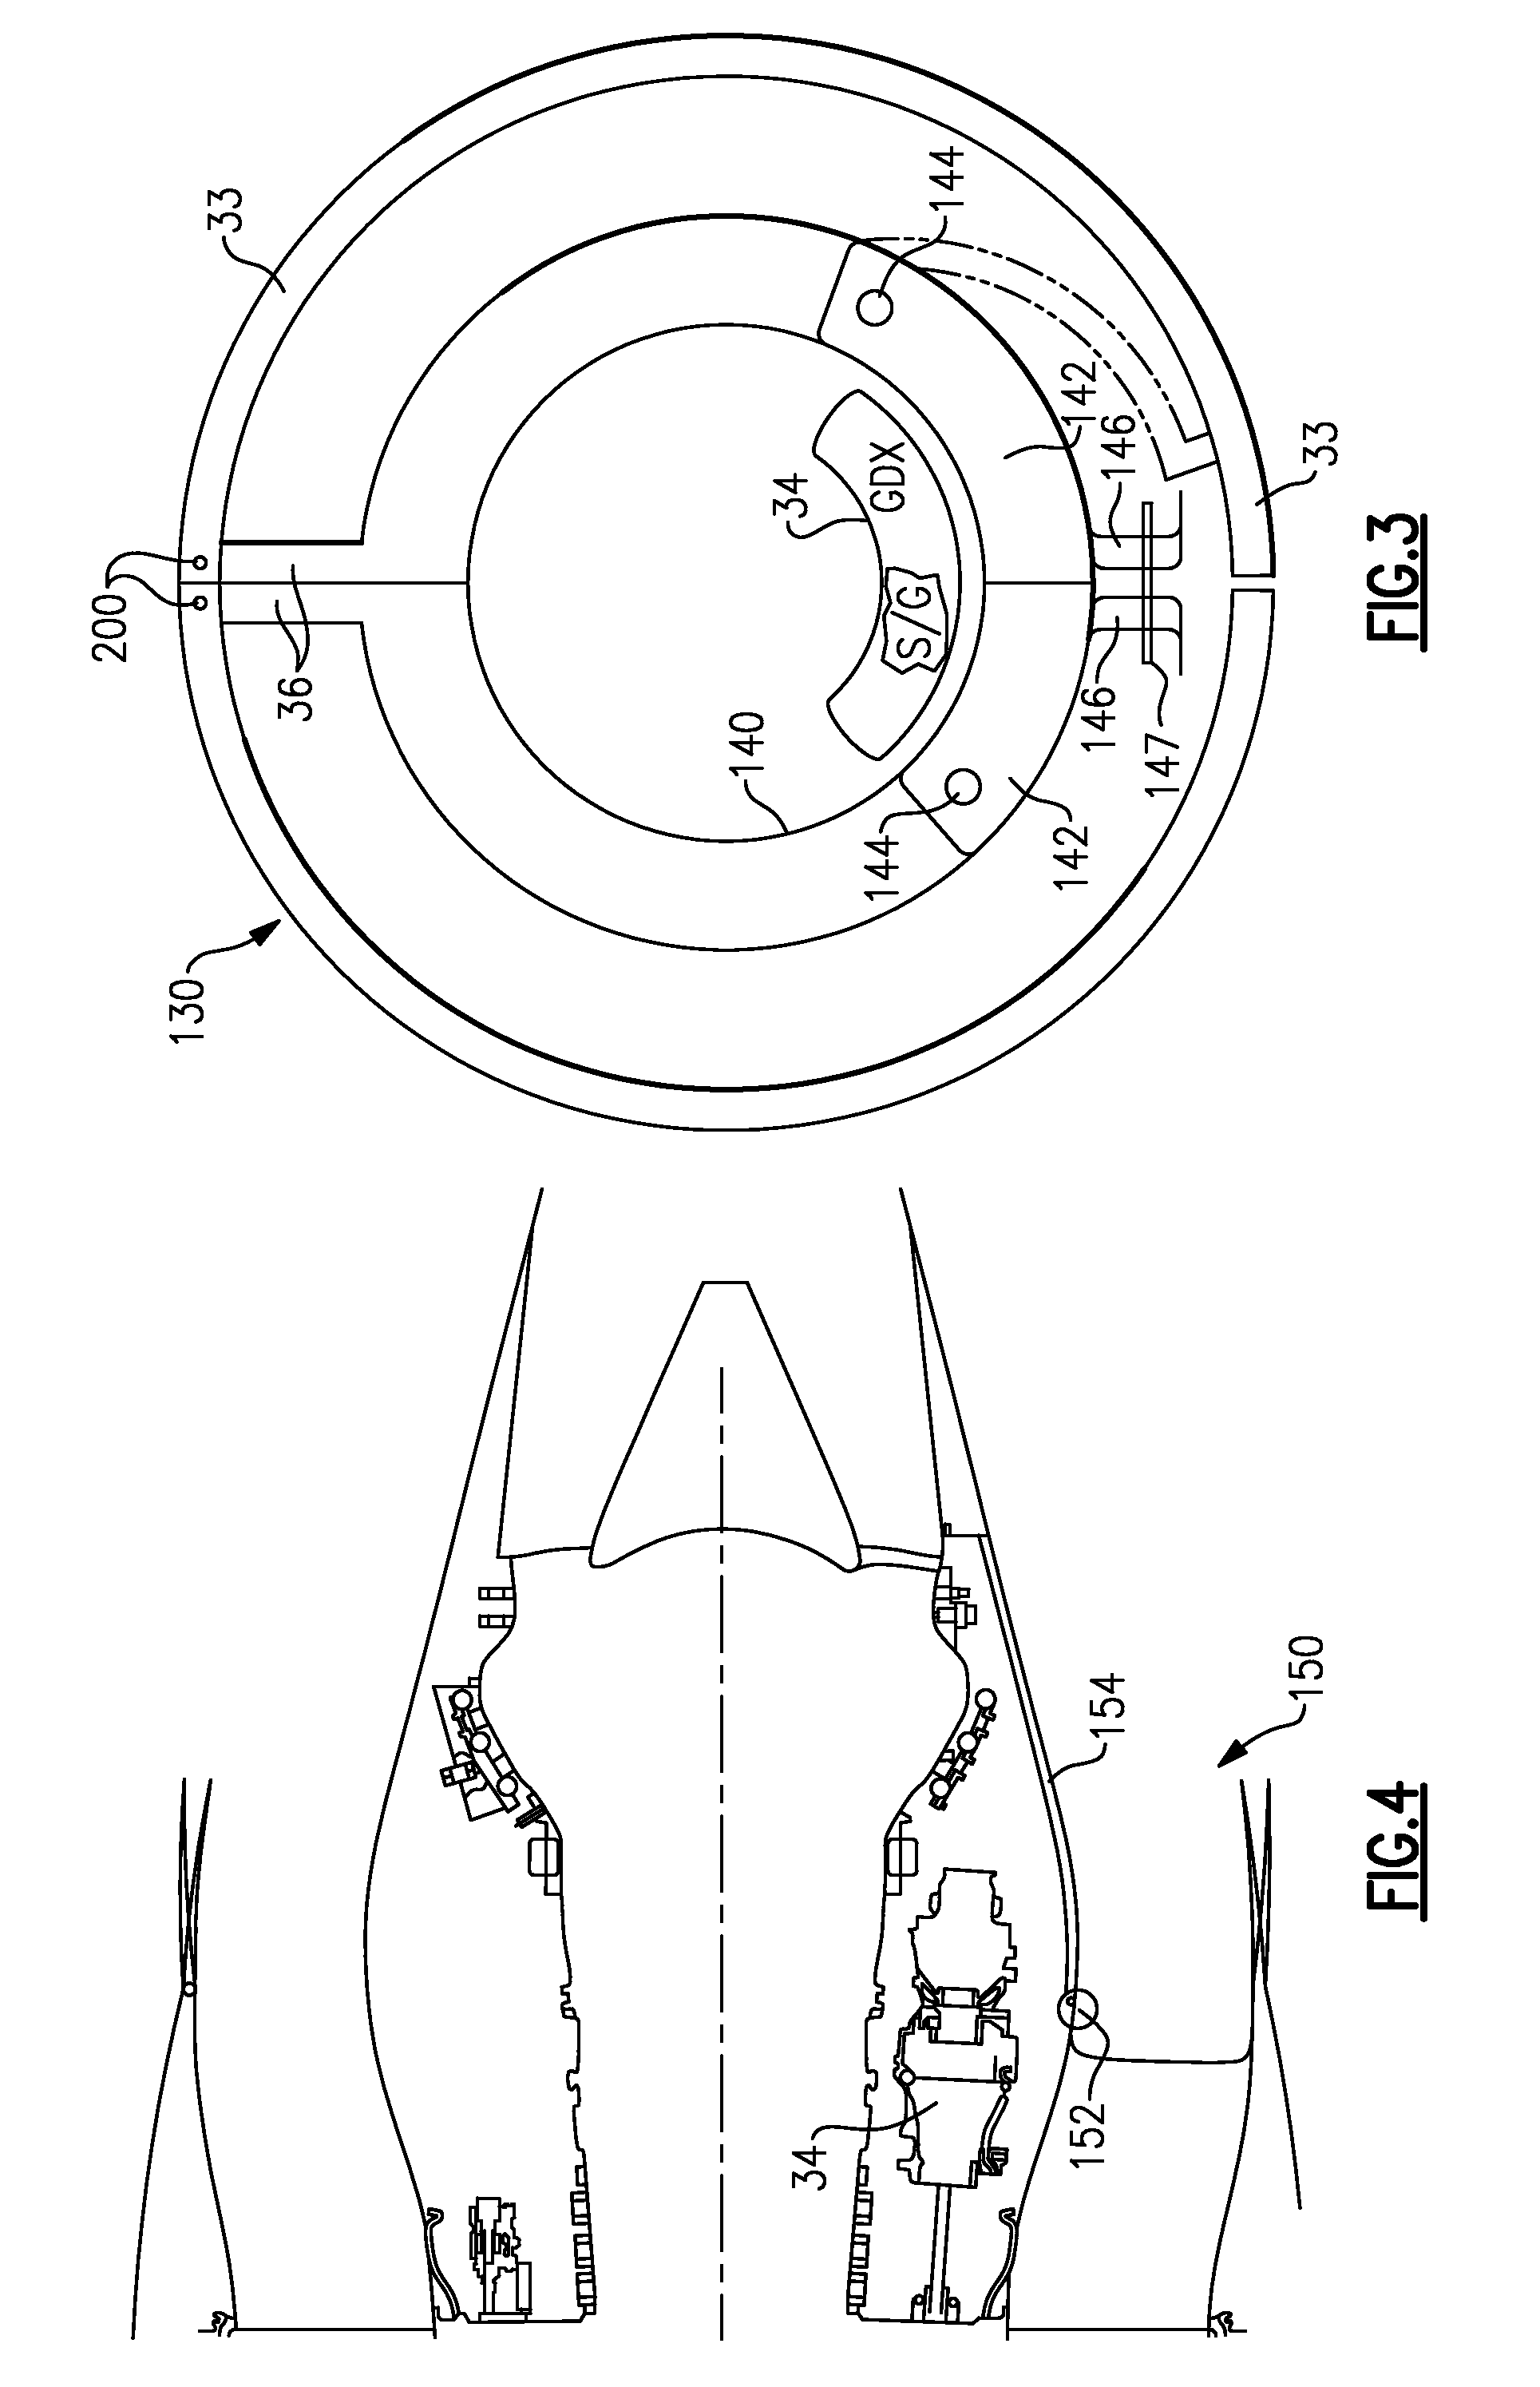 Access door for gas turbine engine components